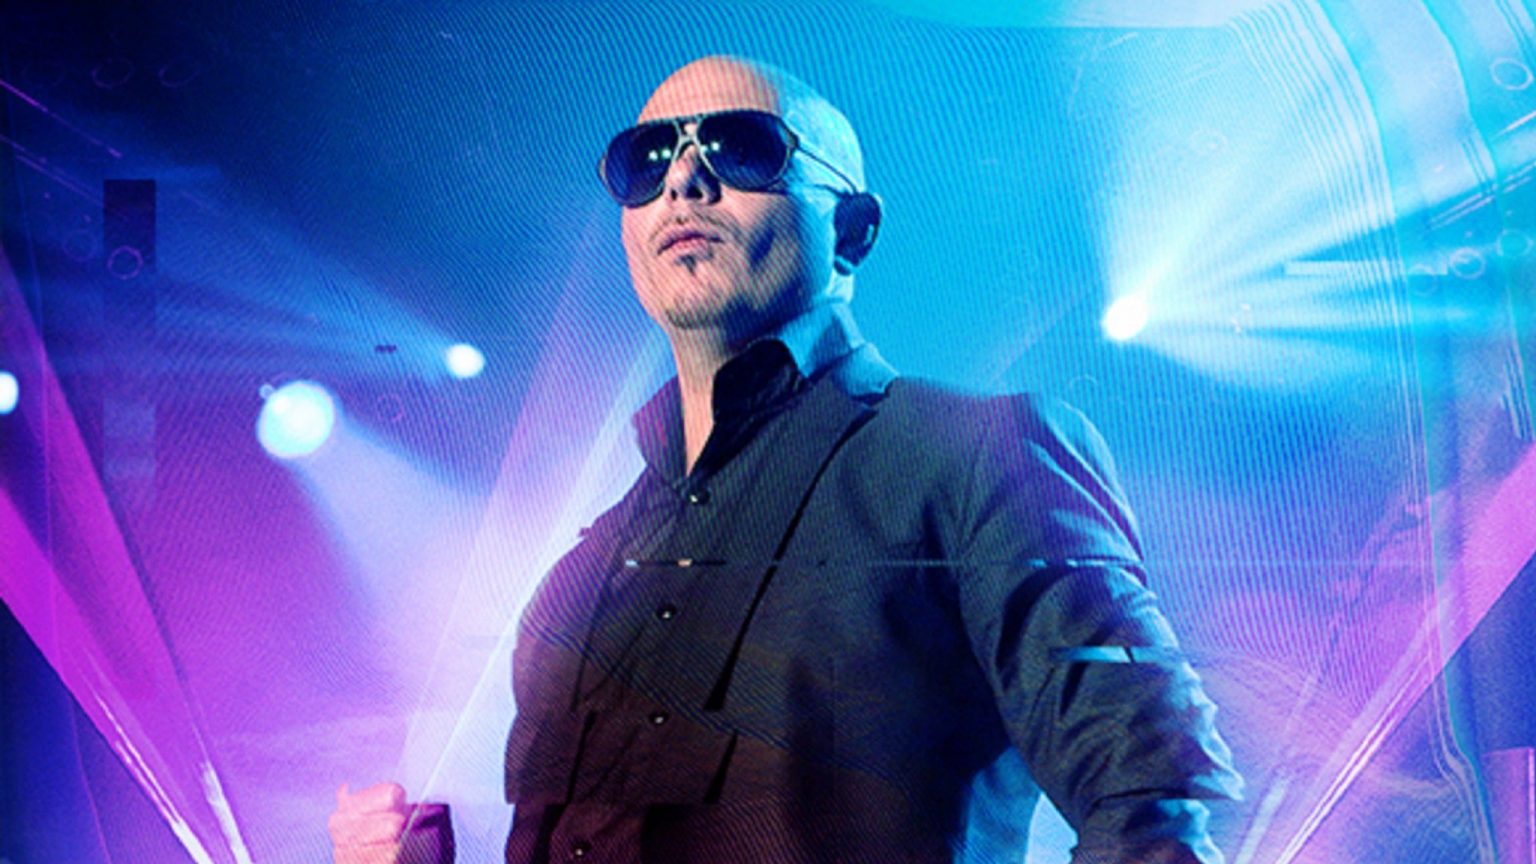 Pitbull Tour 2022 Dates, Tickets & Concert Schedule At a Glance